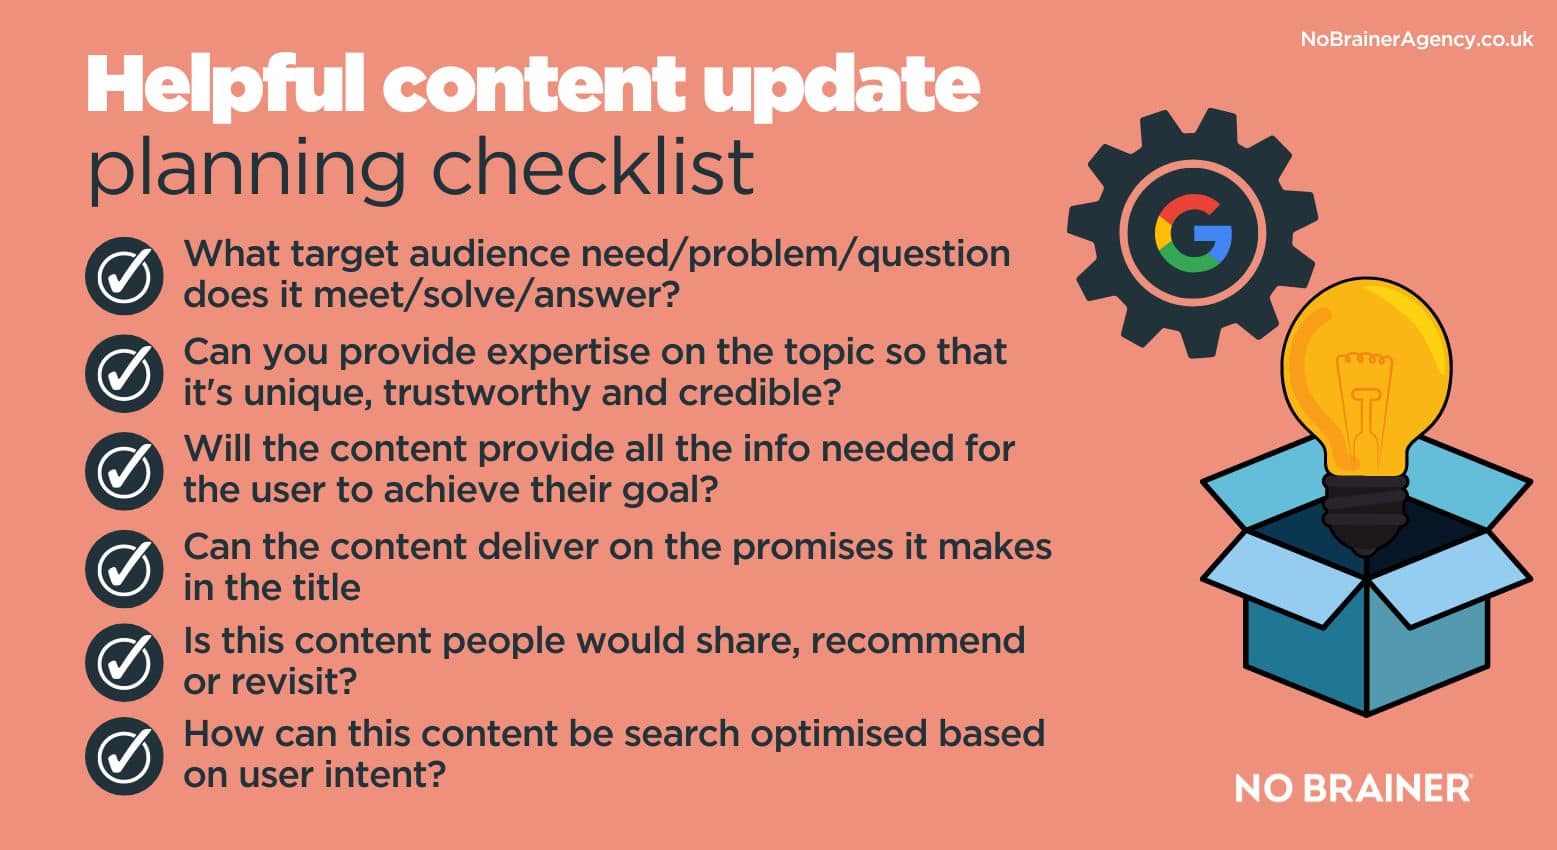 checklist for creating content according to Google’s helpful content update